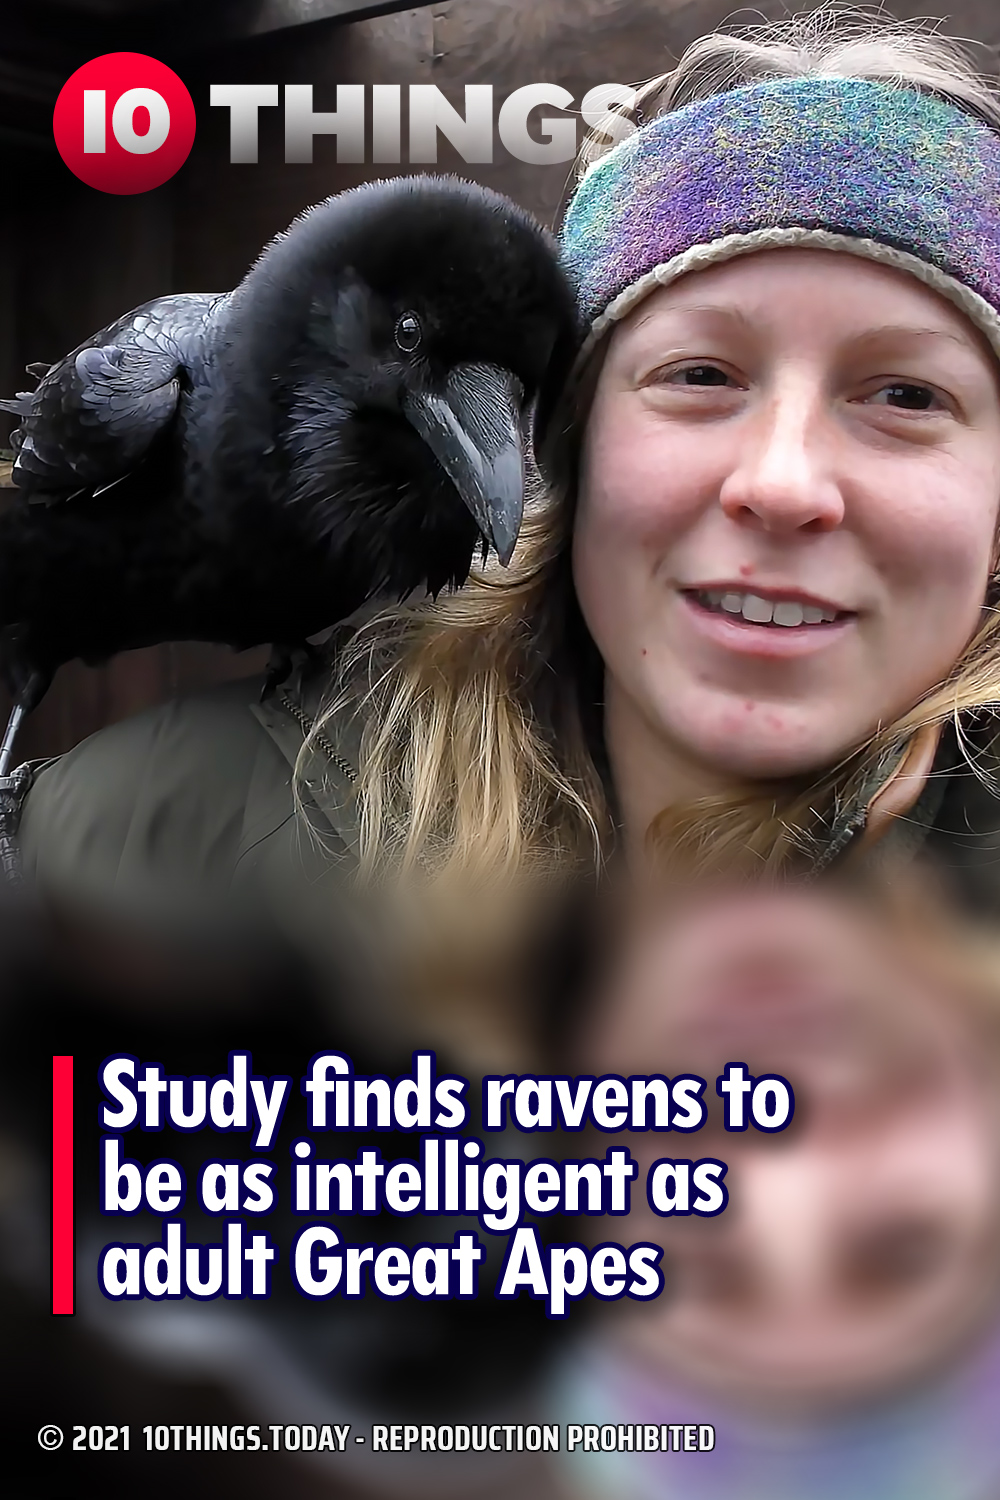 Study finds ravens to be as intelligent as adult Great Apes